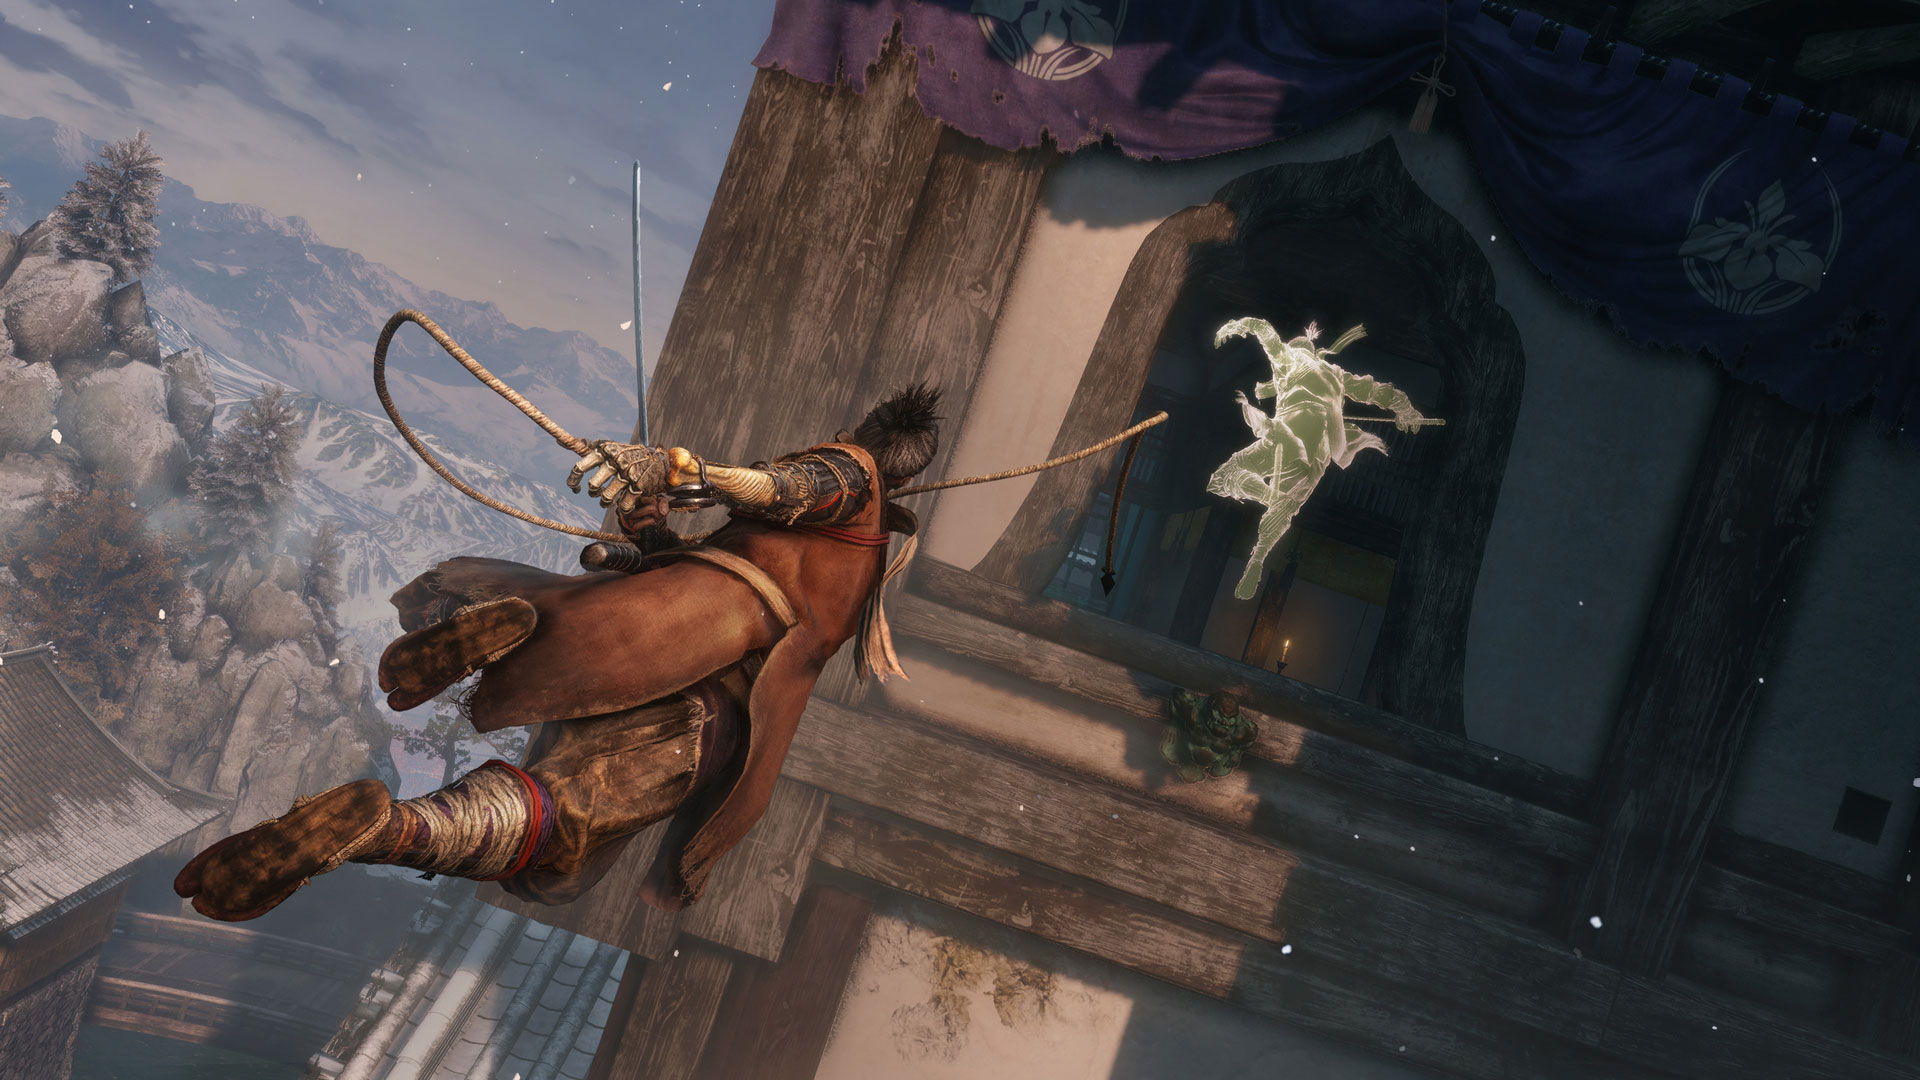 Sekiro Shadows Die Twice - PlayStation 4 : Activision Inc: Video Games 